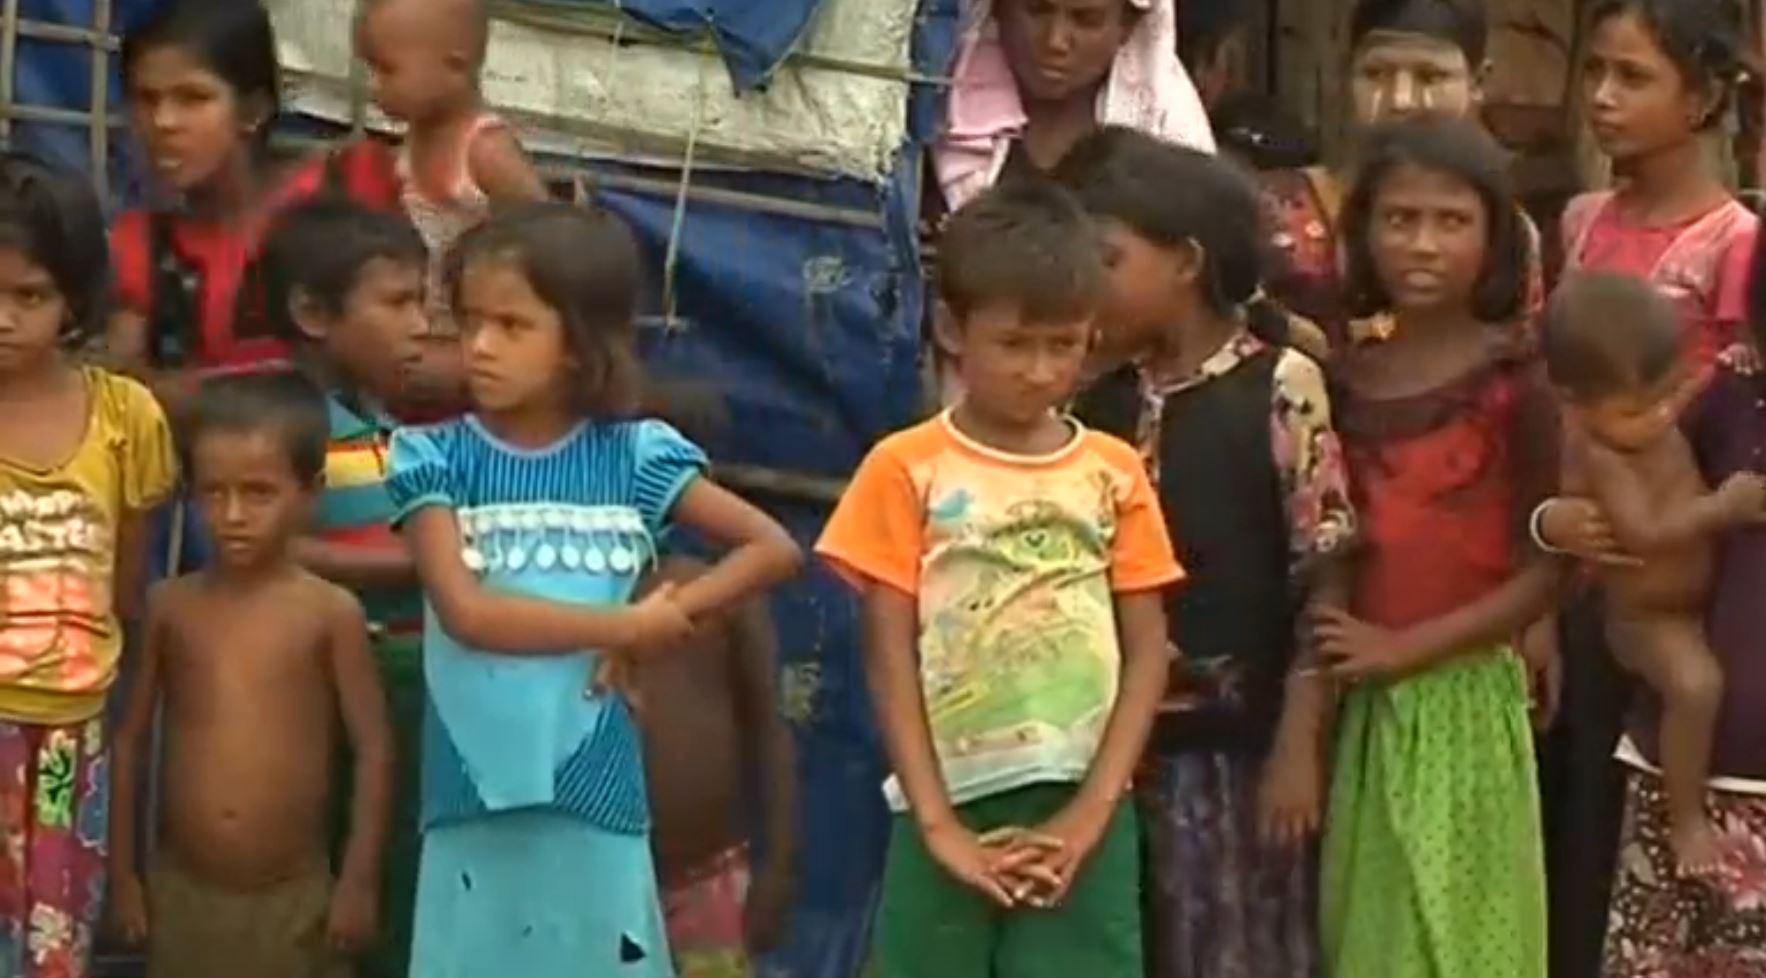 Some of the Rohingya children in refugee camps. Human Rights Watch hopes to see ASEAN countries push to solve Rohingya crisis in the upcoming meeting in Yangon. (Photo grabbed from Reuters video)